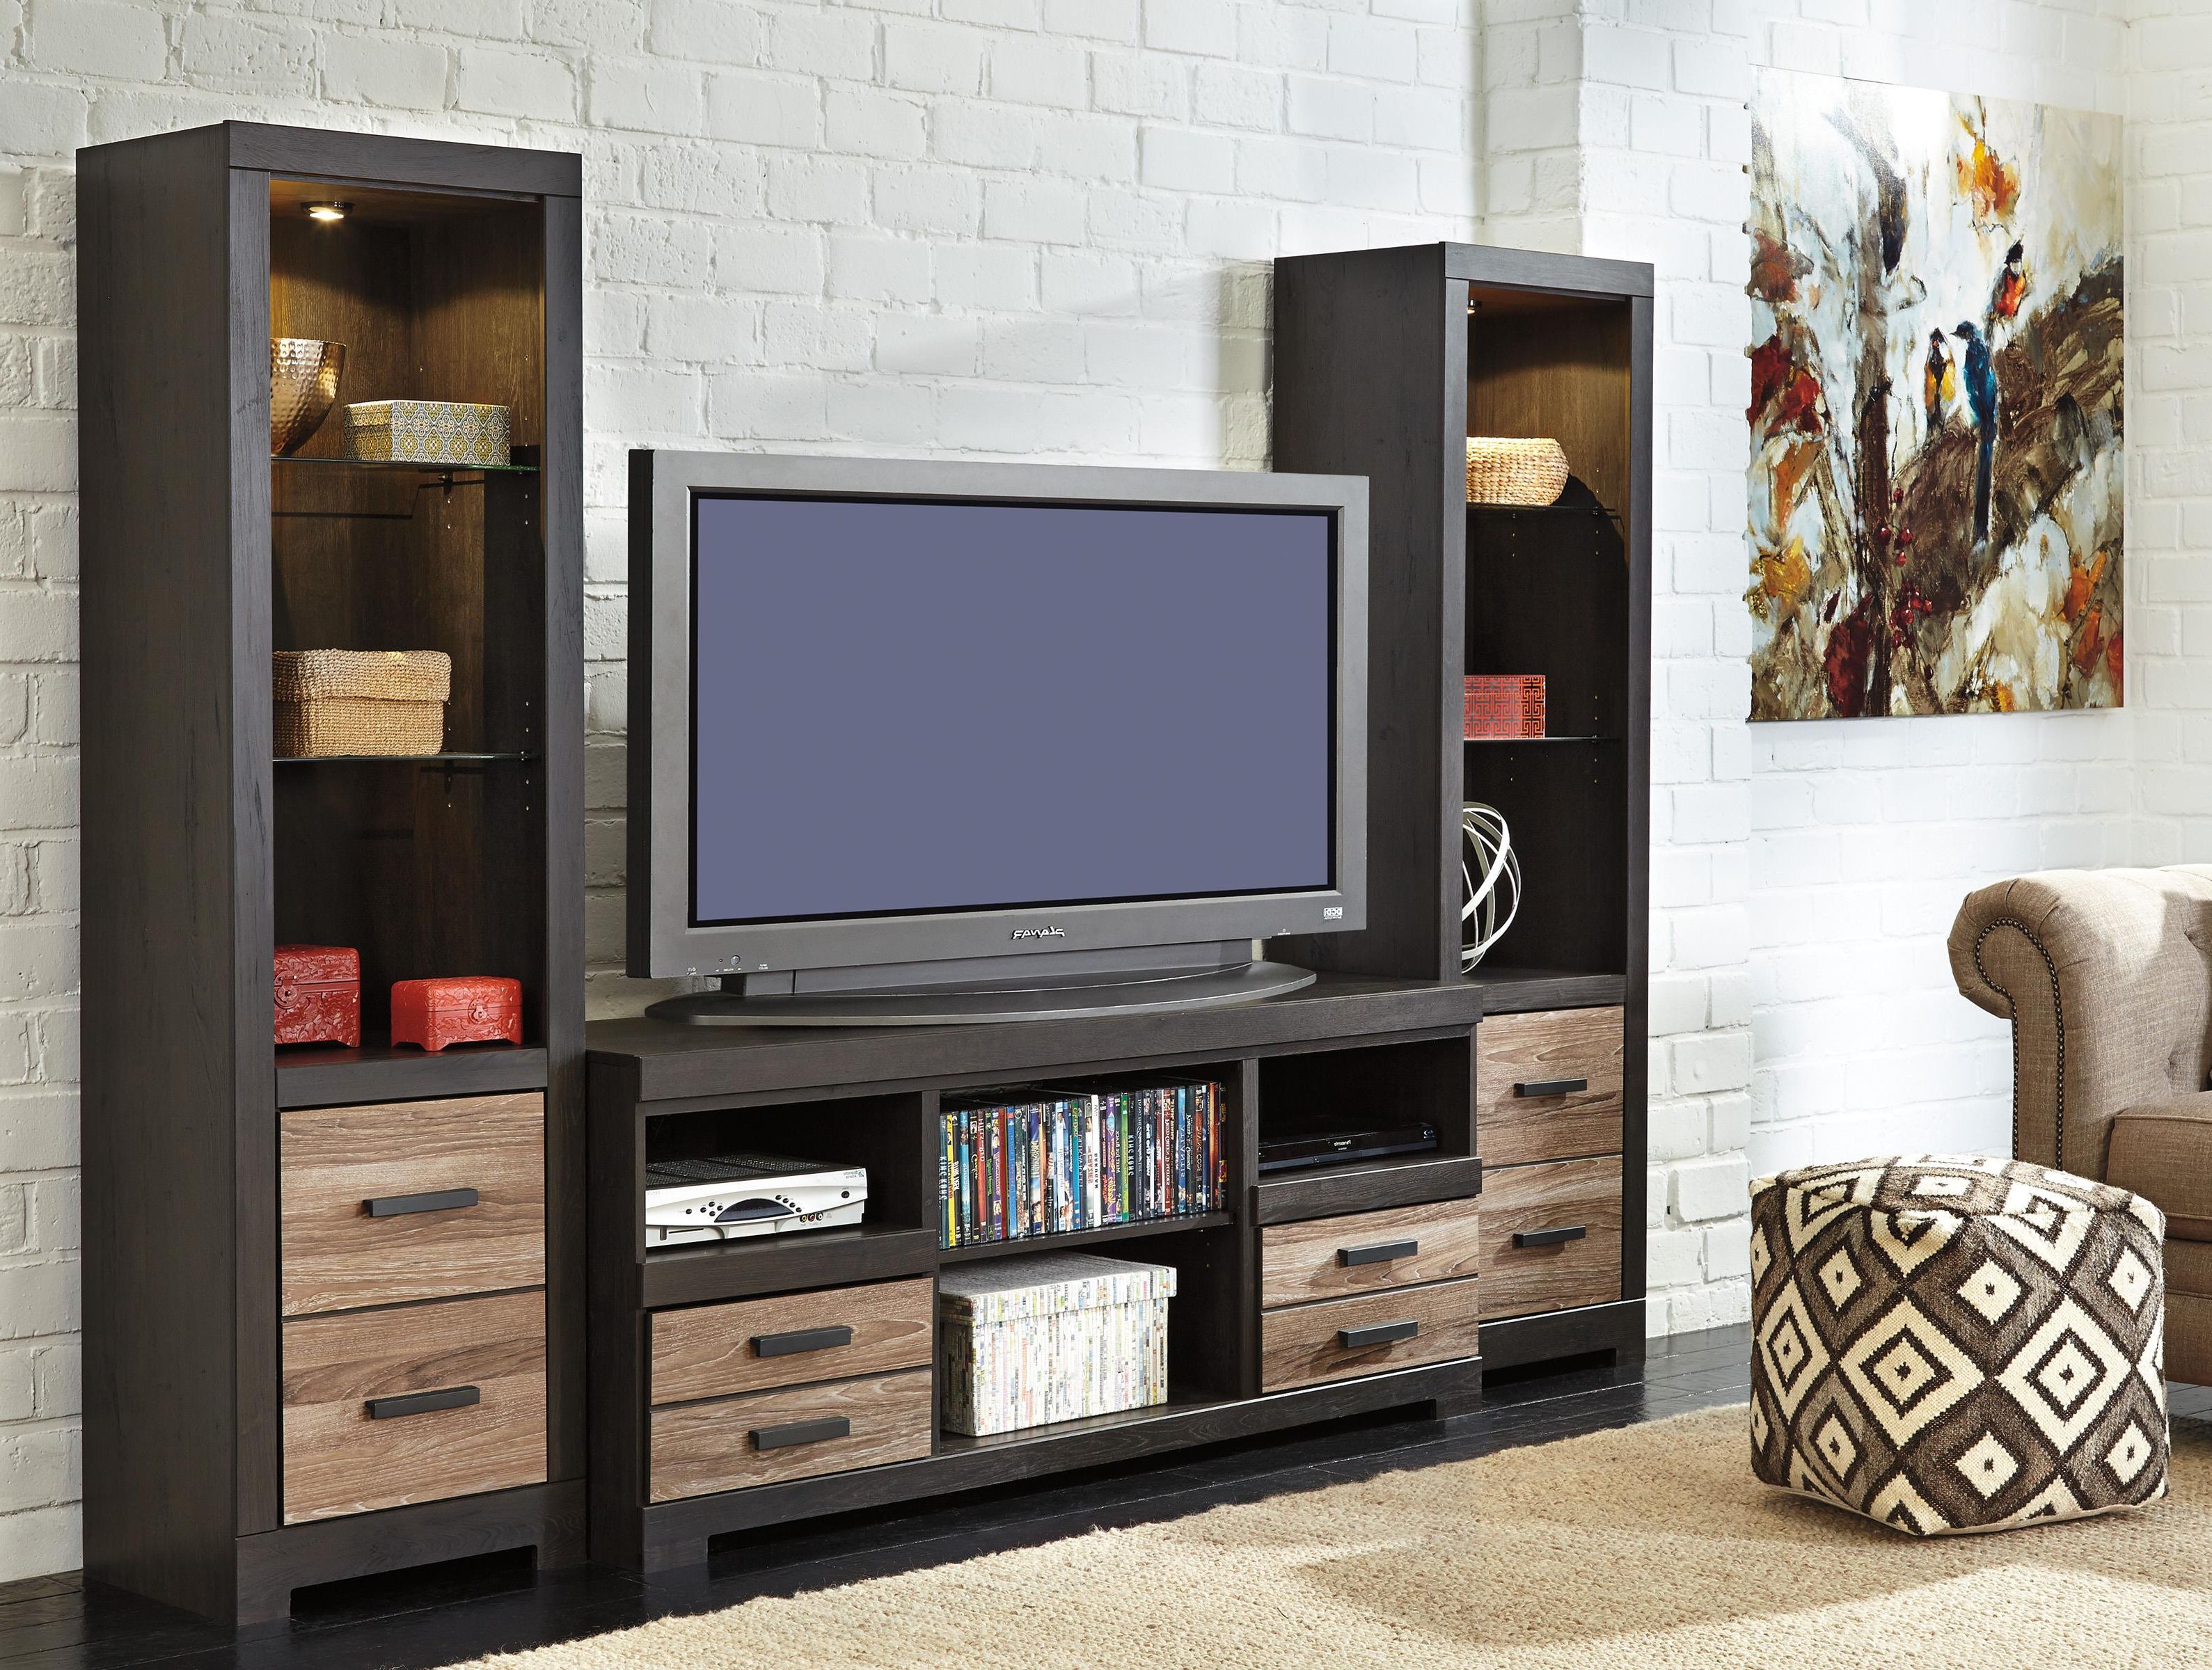 Newest Open Shelf Tv Stands Intended For Open Shelving Entertainment Center Tv Stand Back With Shelves Shelf (Photo 9 of 20)